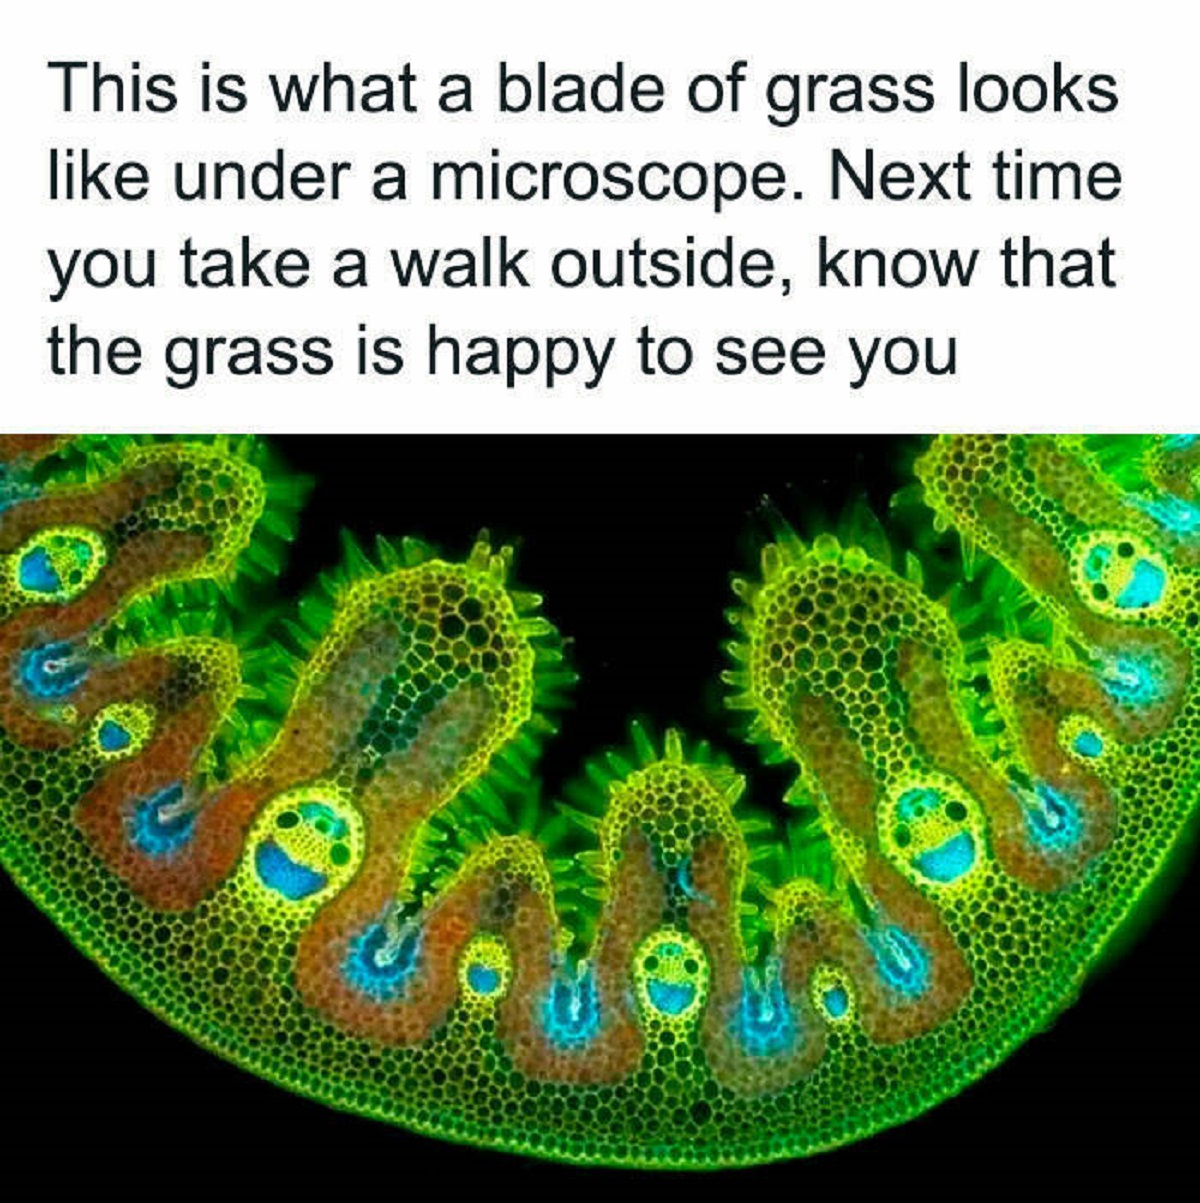 grass under a microscope - This is what a blade of grass looks under a microscope. Next time you take a walk outside, know that the grass is happy to see you